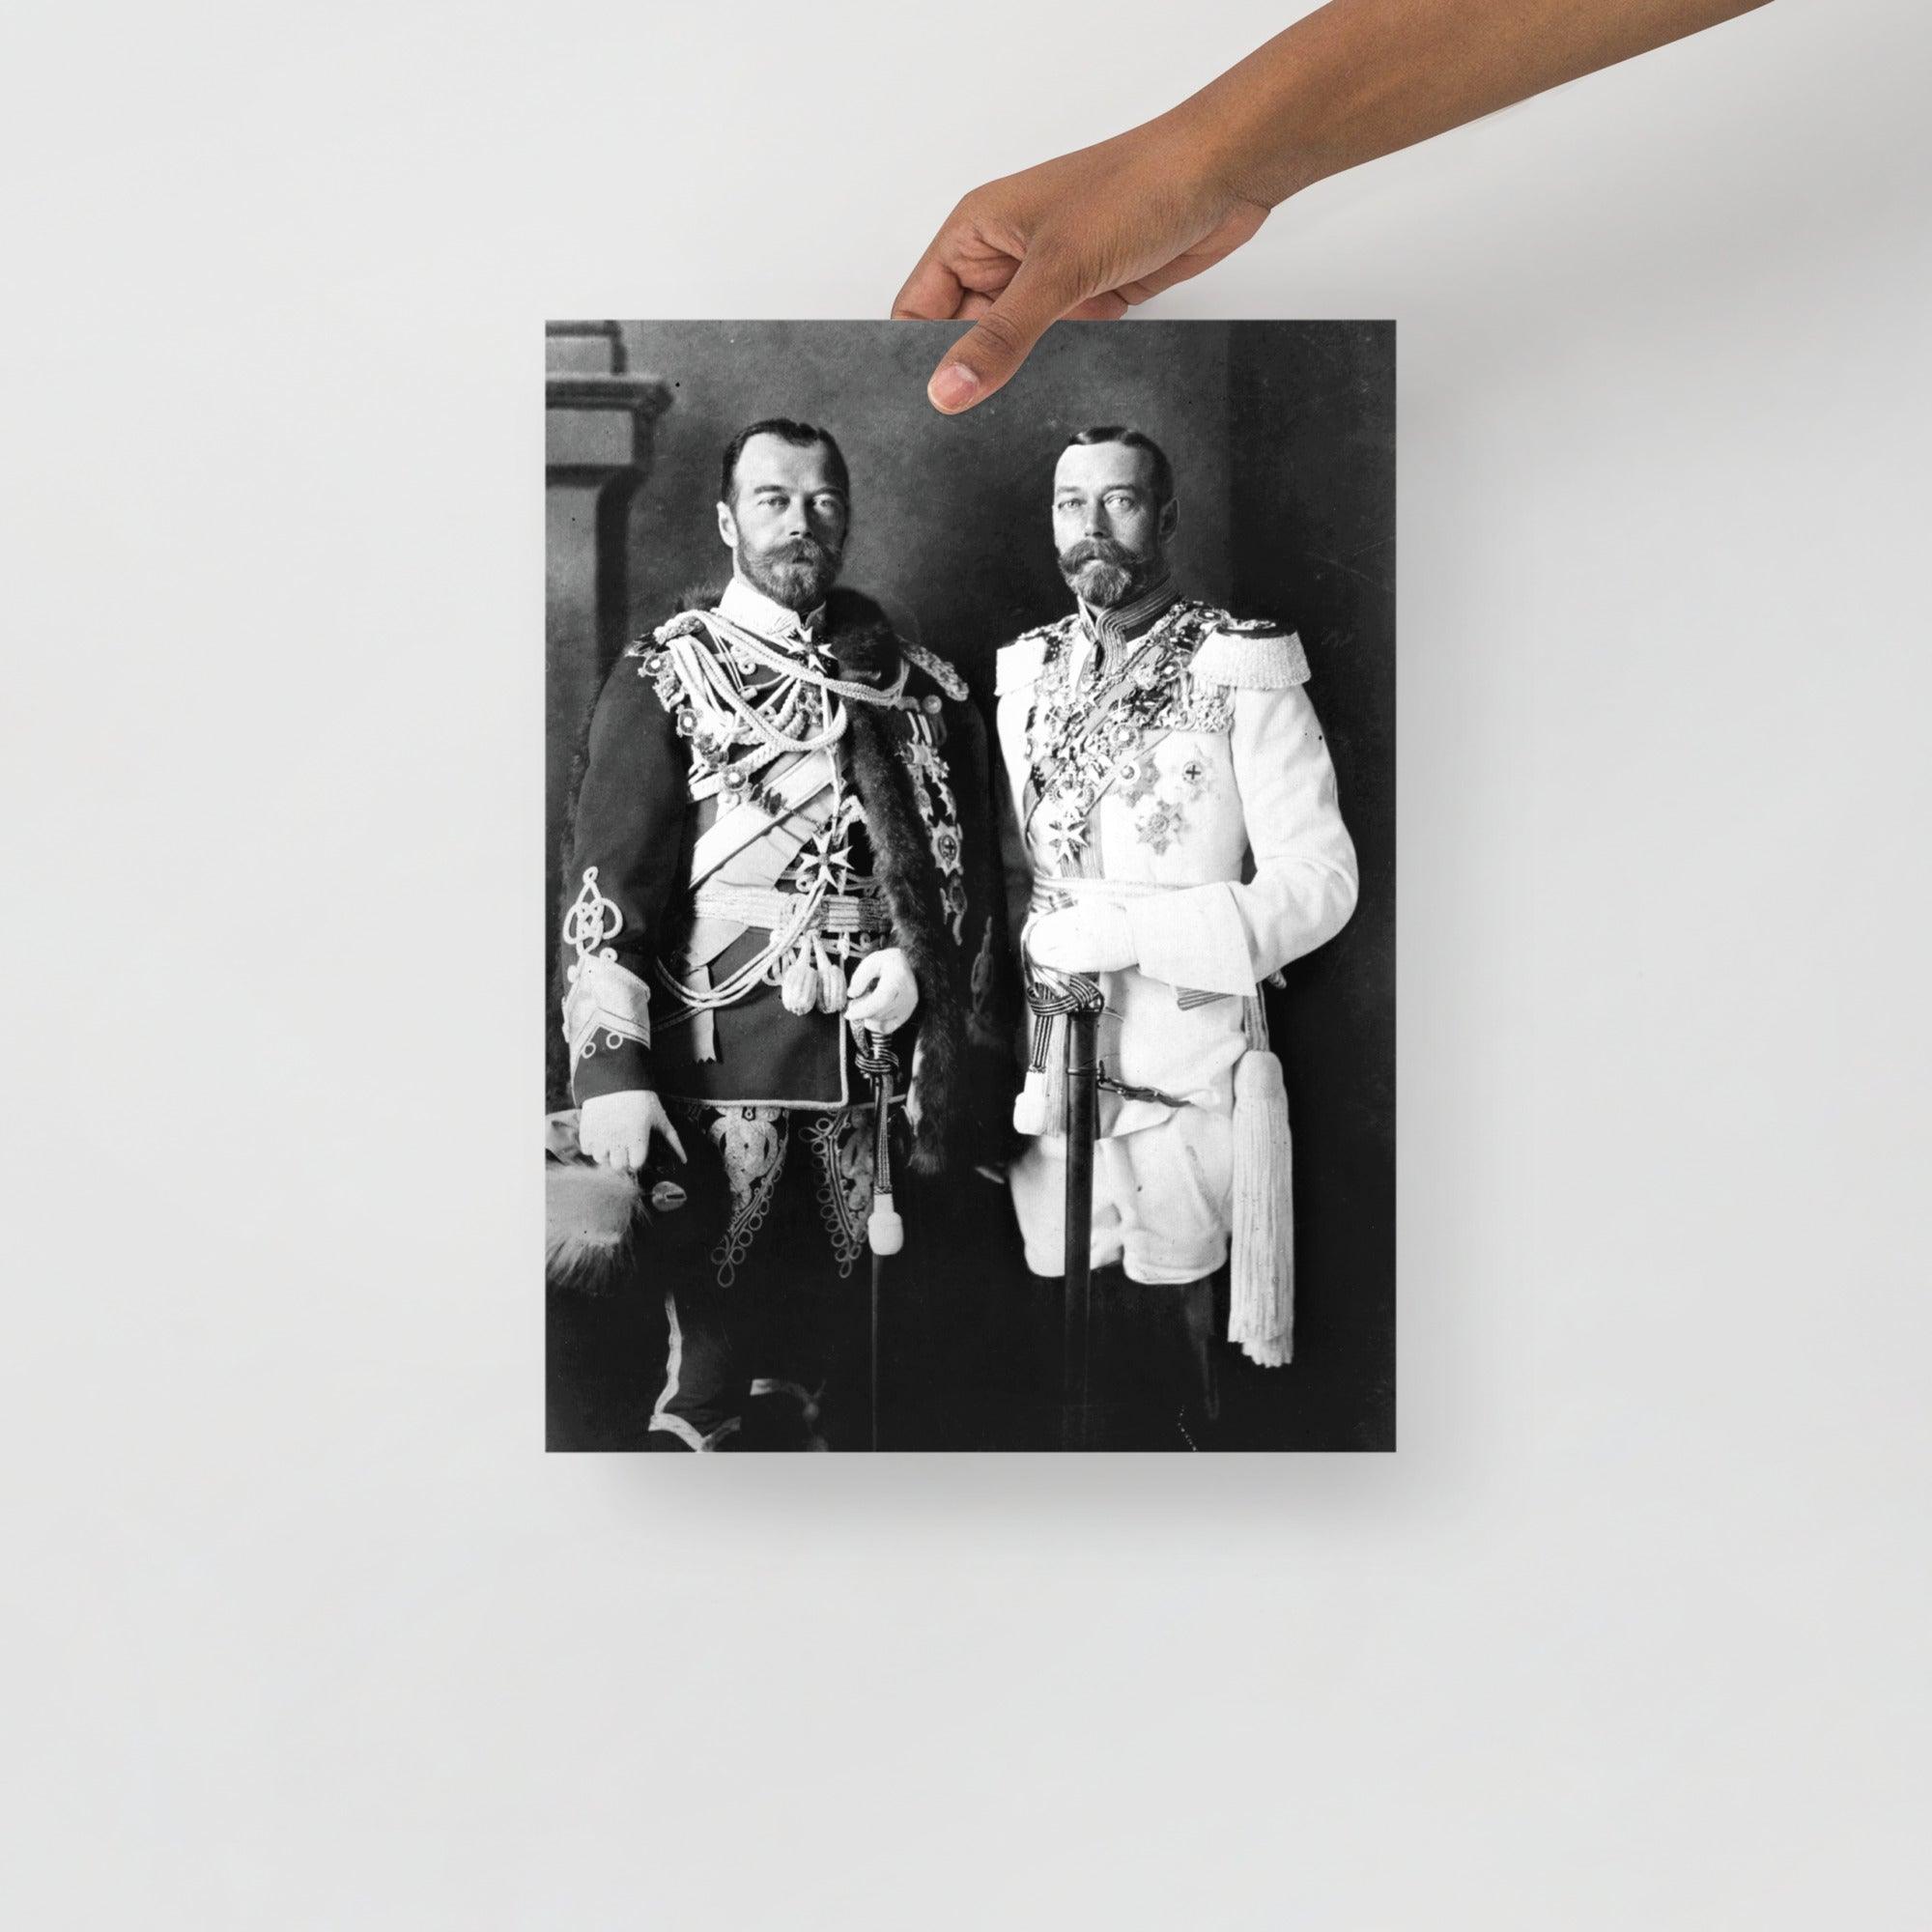 A Tsar Nicholas II & King George V poster on a plain backdrop in size 12x16”.